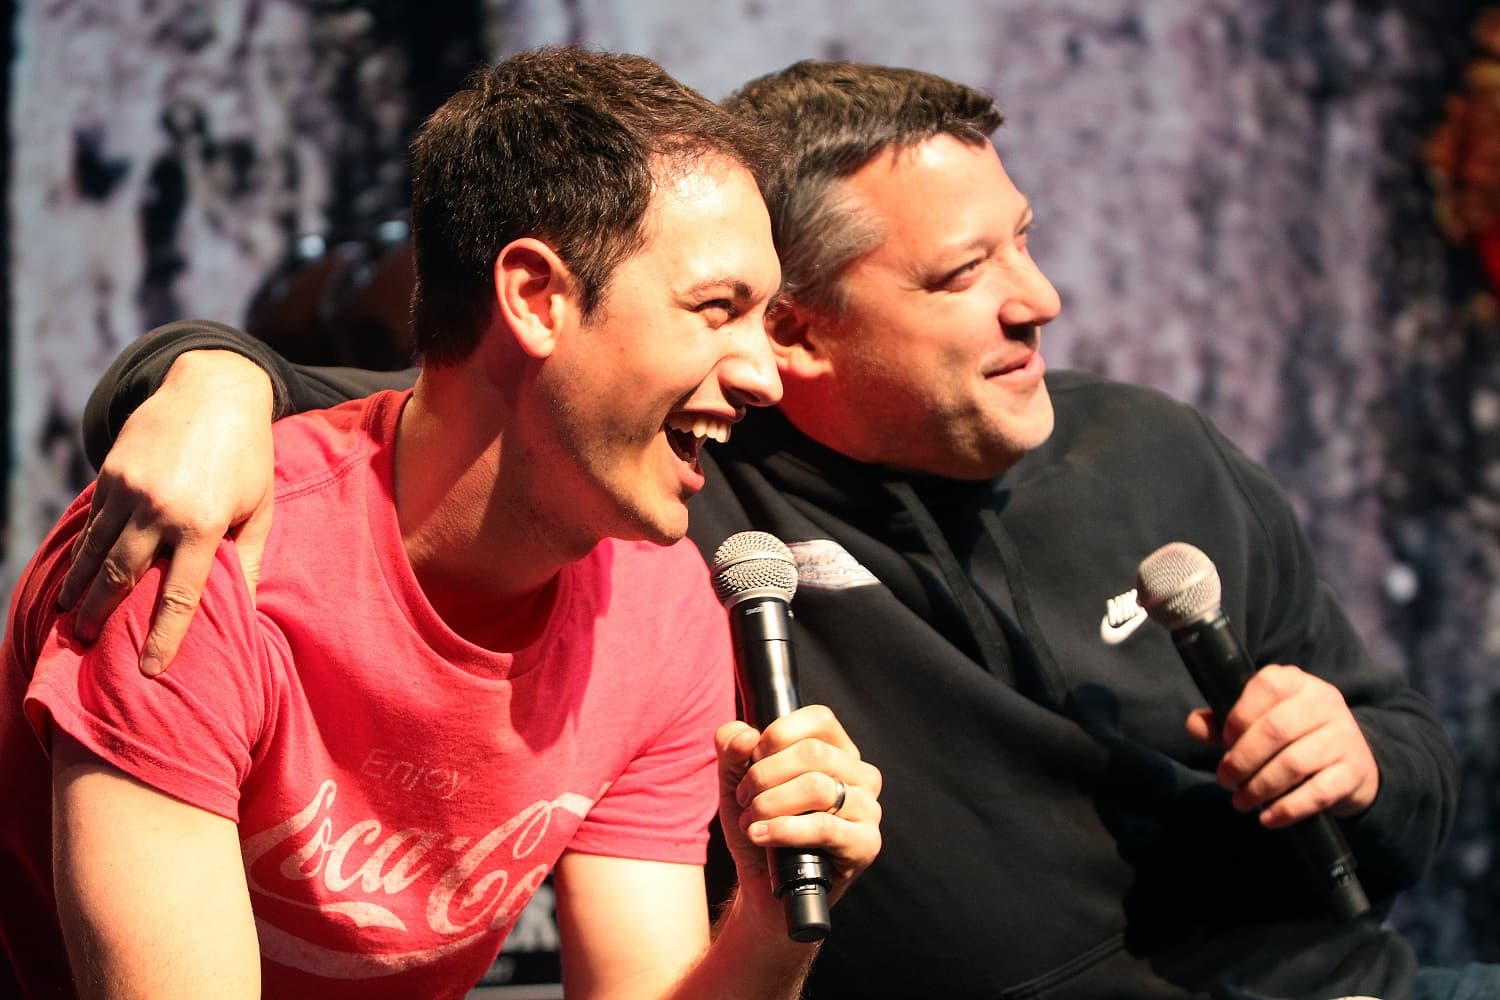 Joey Logano laughs on stage with former NASCAR driver Tony Stewart, during the Texas Motor Speedway FANDAGO event on April 6, 2017.